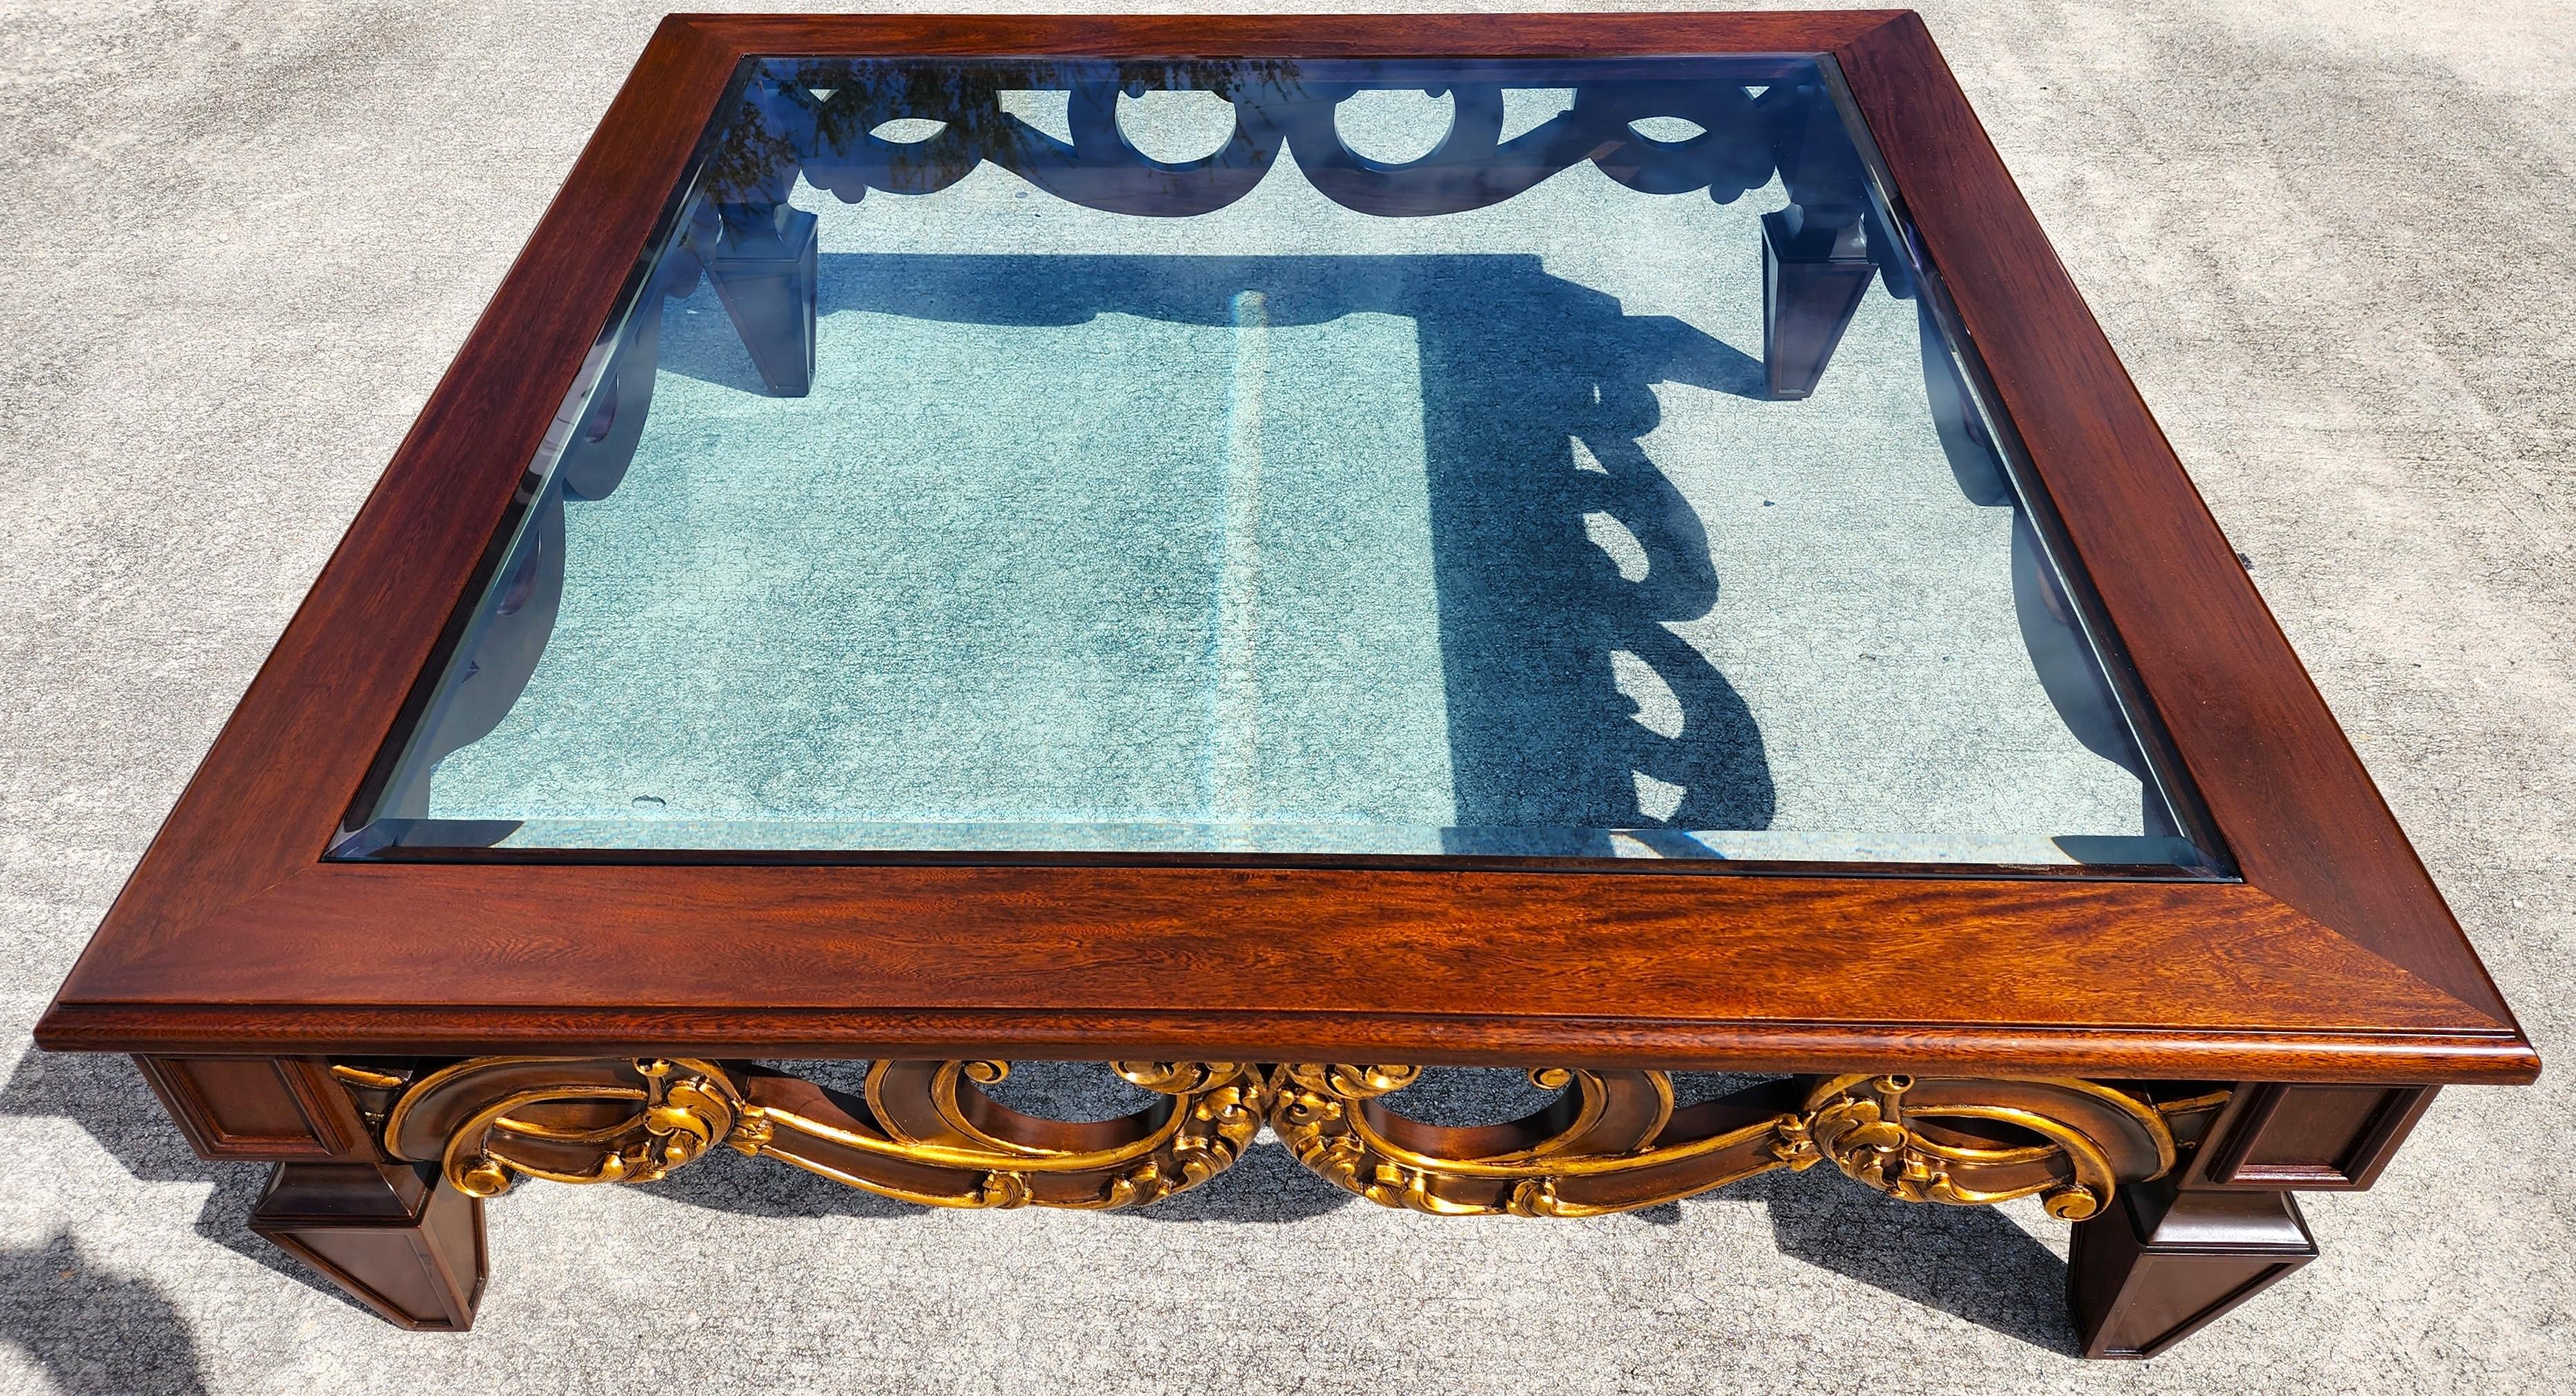 Vintage French Provincial Coffee Table Huge 5 Foot In Good Condition For Sale In Lake Worth, FL